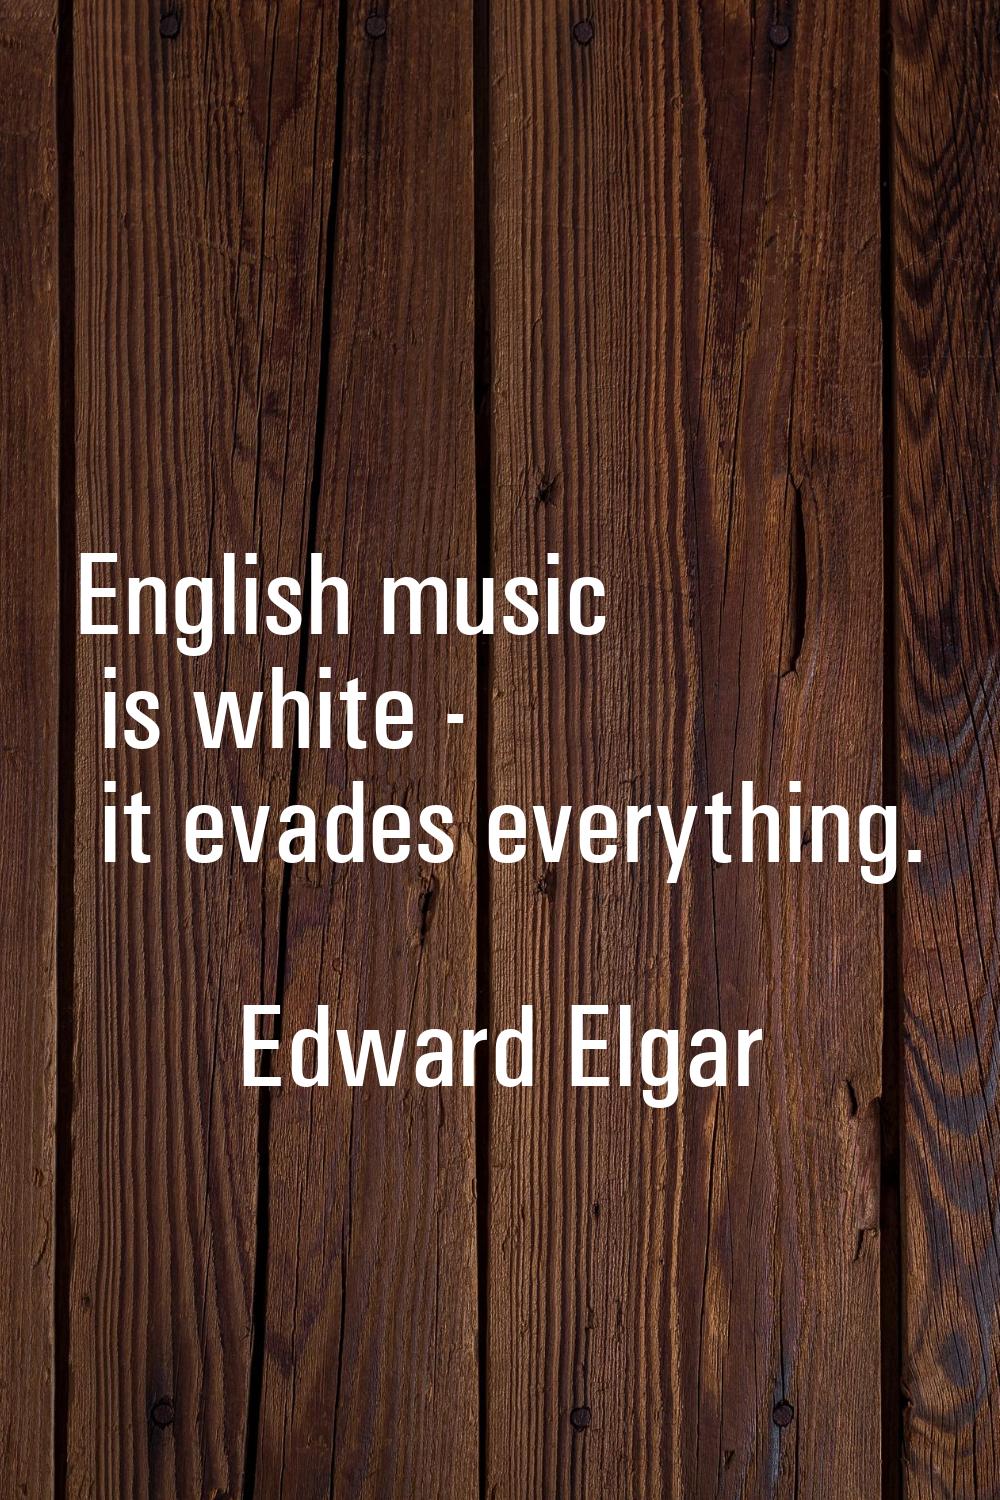 English music is white - it evades everything.